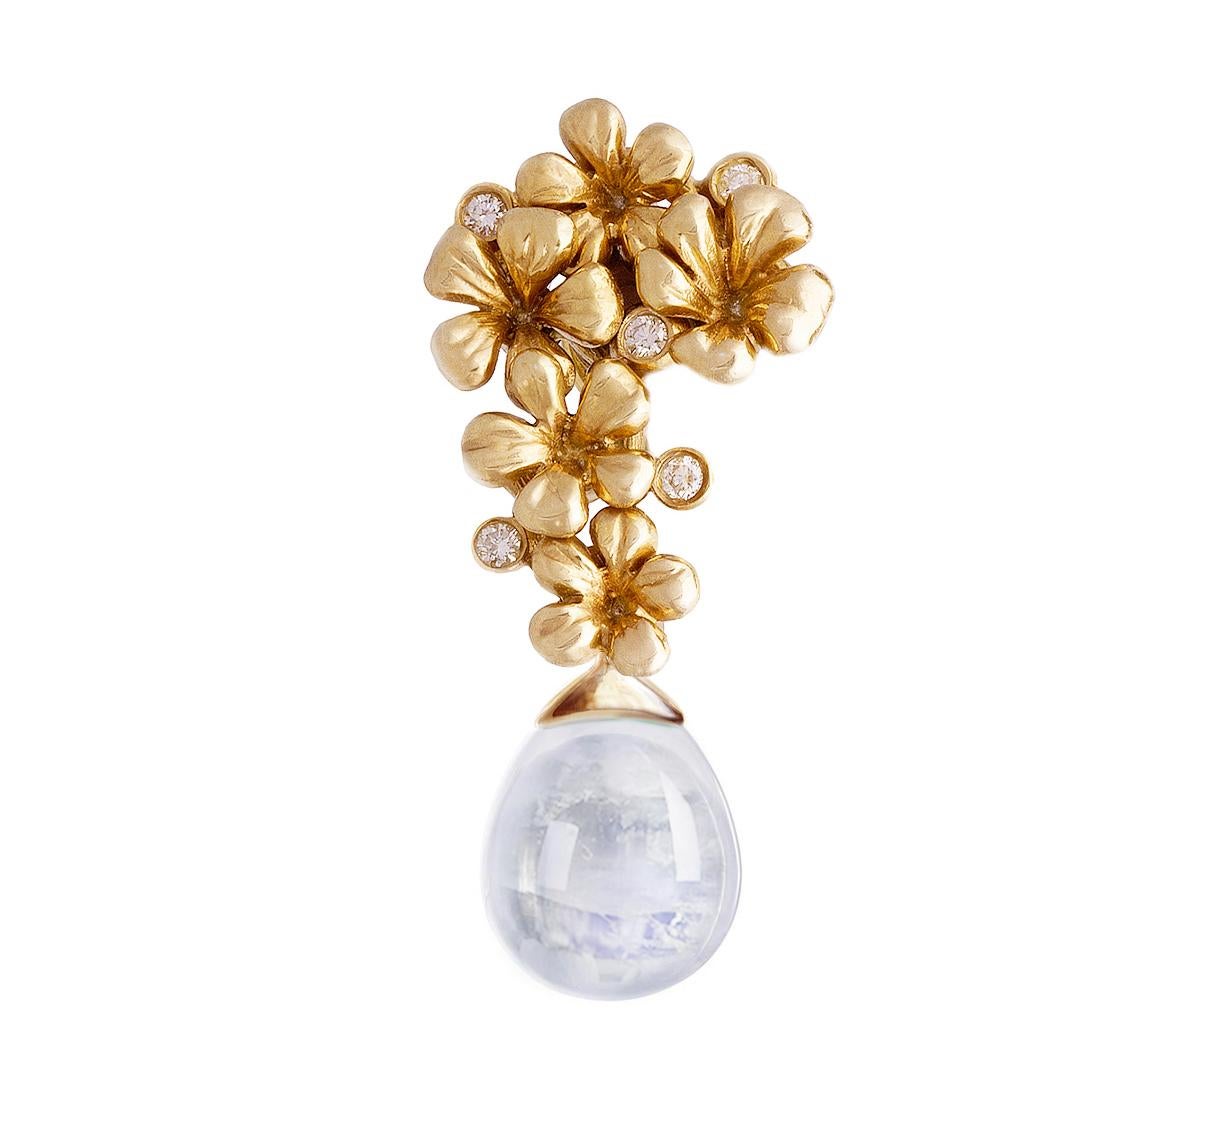 Introducing the Plum Blossom contemporary cocktail clip-on earrings in 18 karat yellow gold. These earrings are encrusted with 10 top natural diamonds VS, F-G and removable natural moonstones (13 mm), which can be easily taken on and off. Designed